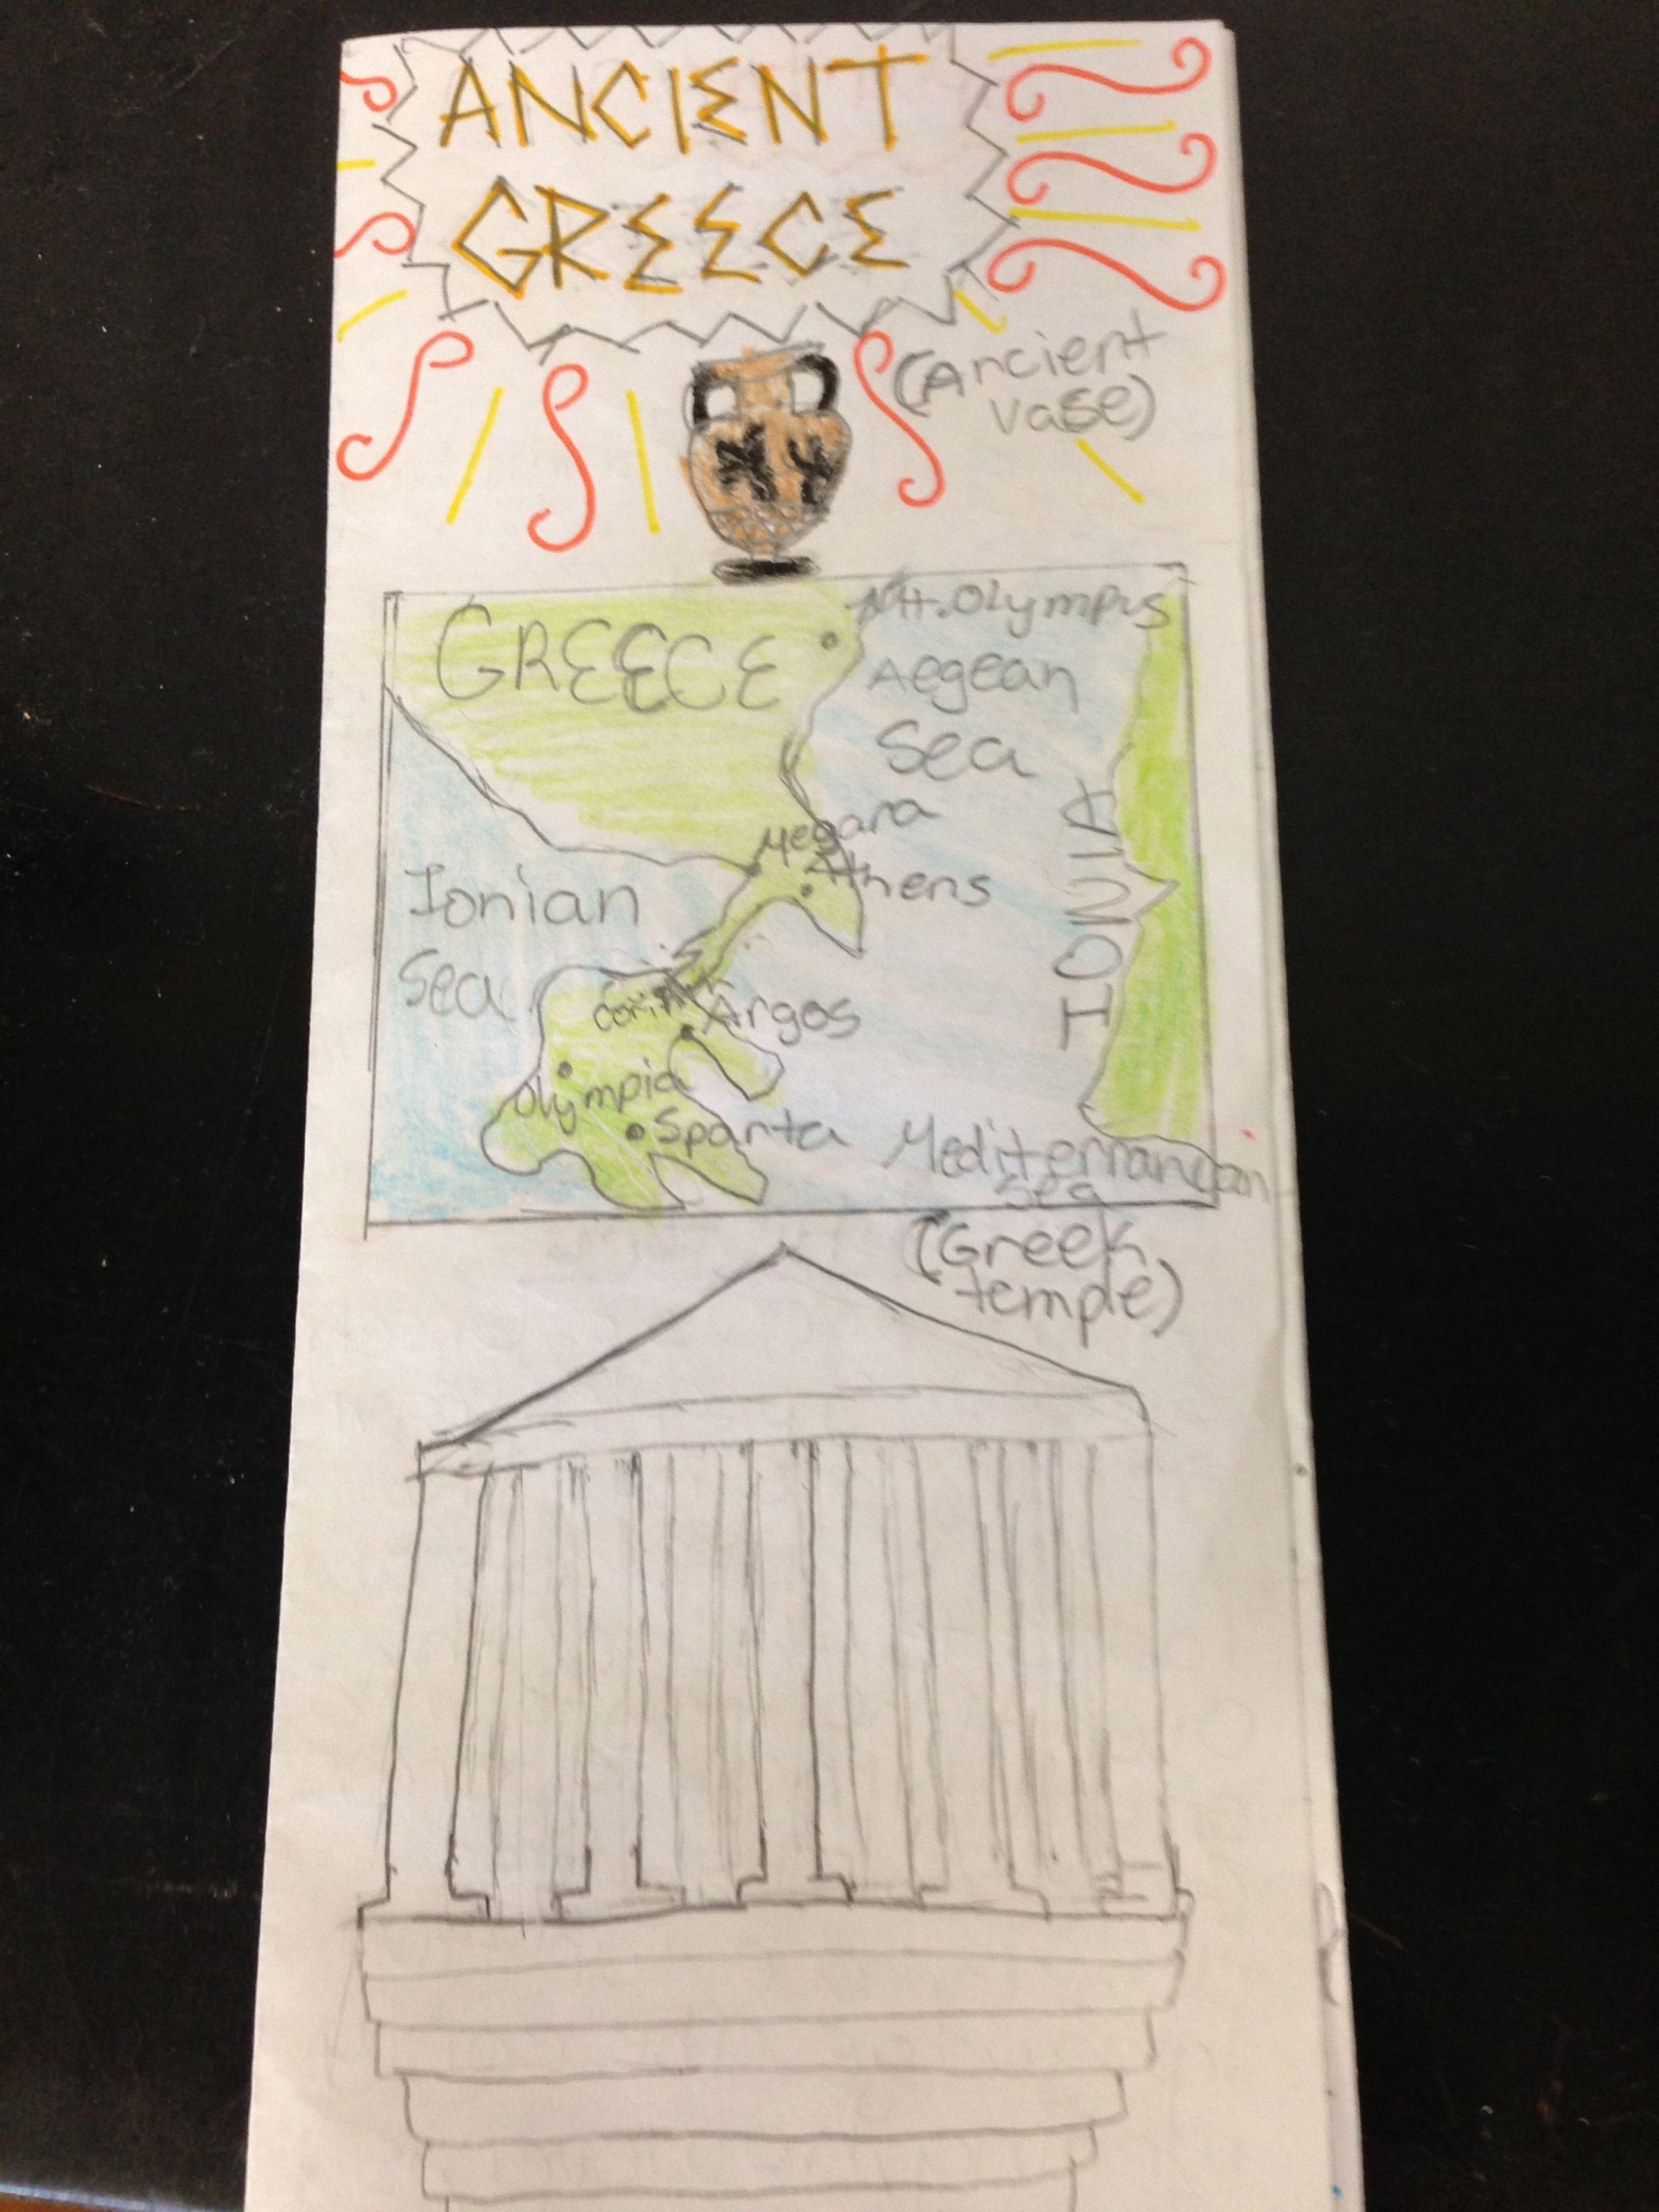 Ancient Greece Travel Brochure: Students Created A Brochure